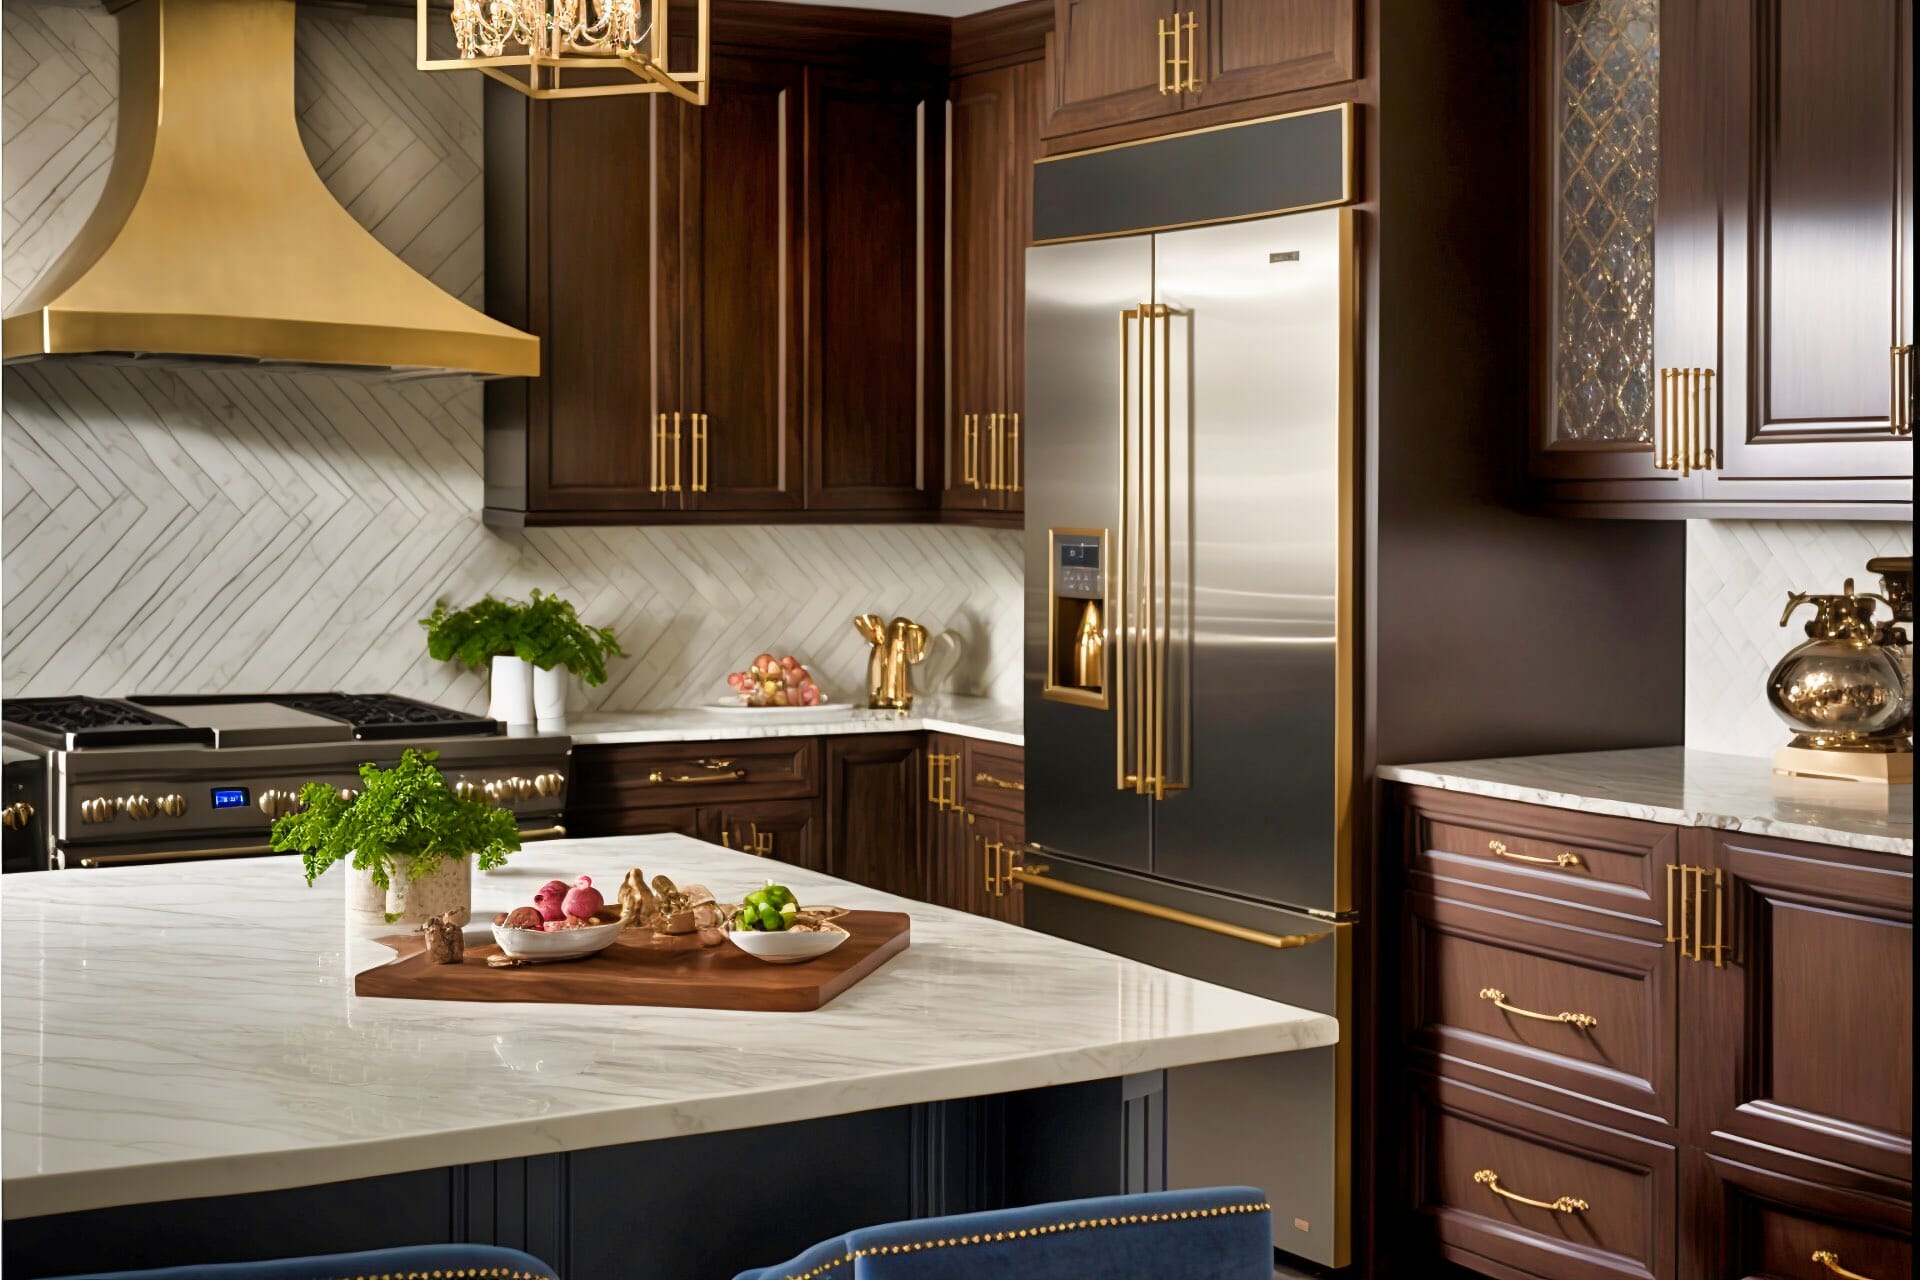 A Glamorous Kitchen Featuring Rich Oak Cabinetry, Gold Hardware And Accents, And A Marble Countertop.